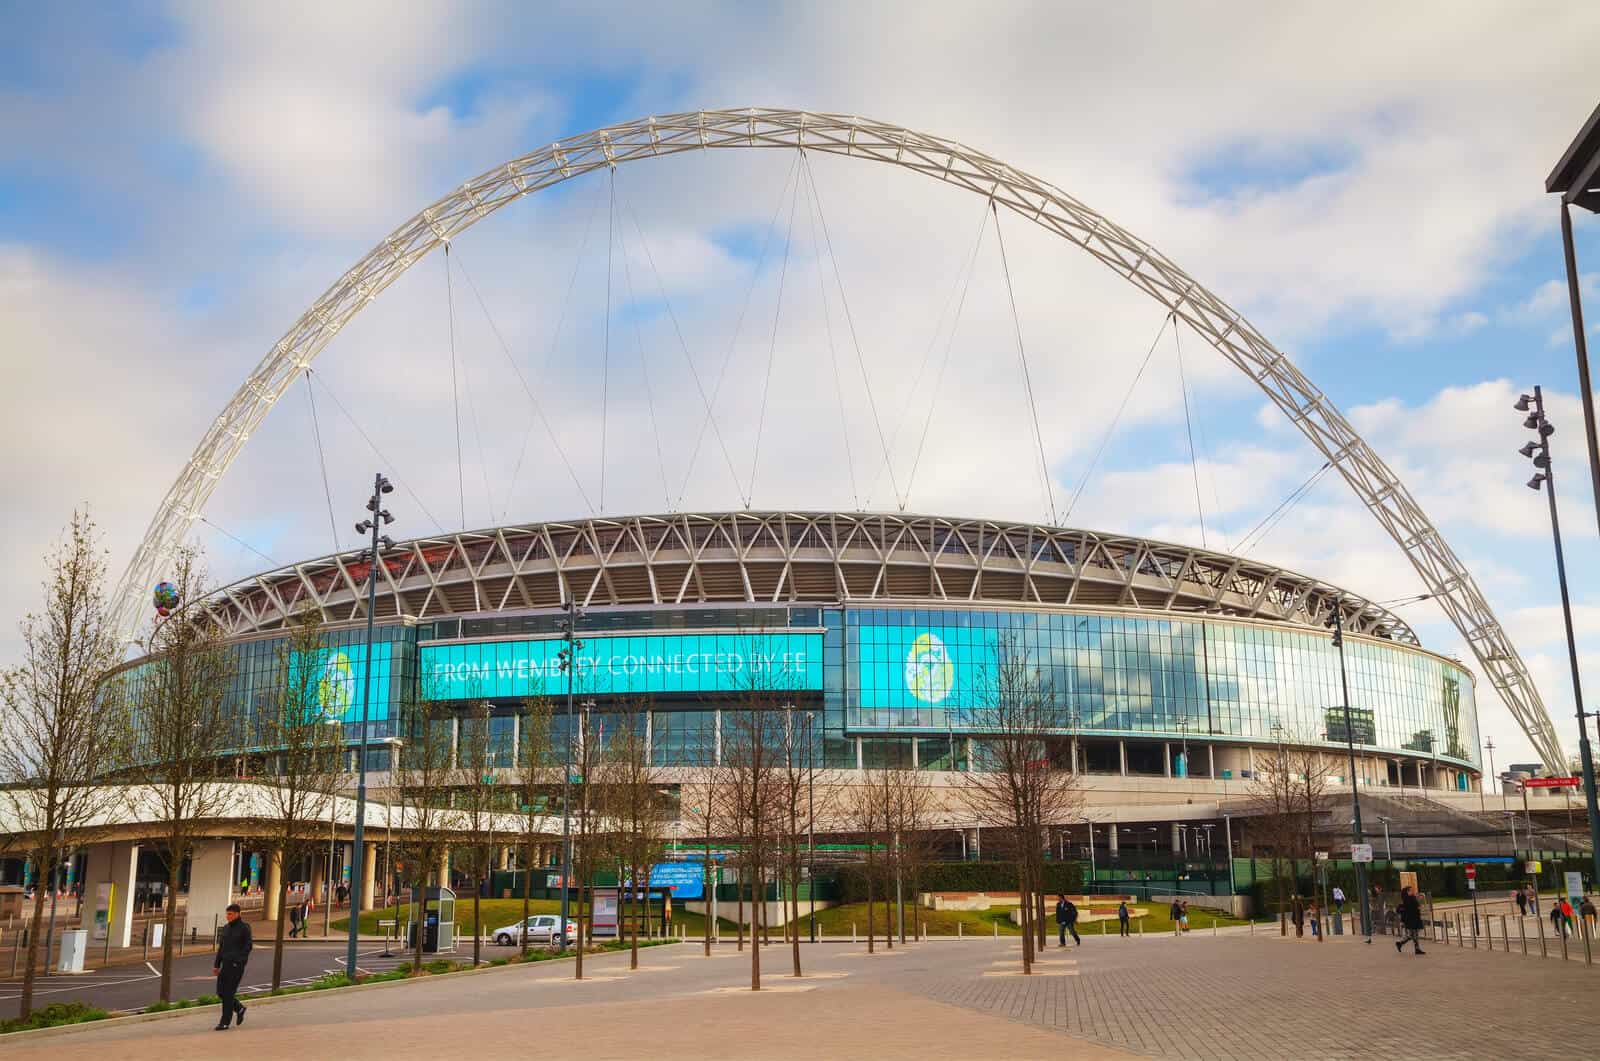 London stadiums to visit as featured in Ted Lasso